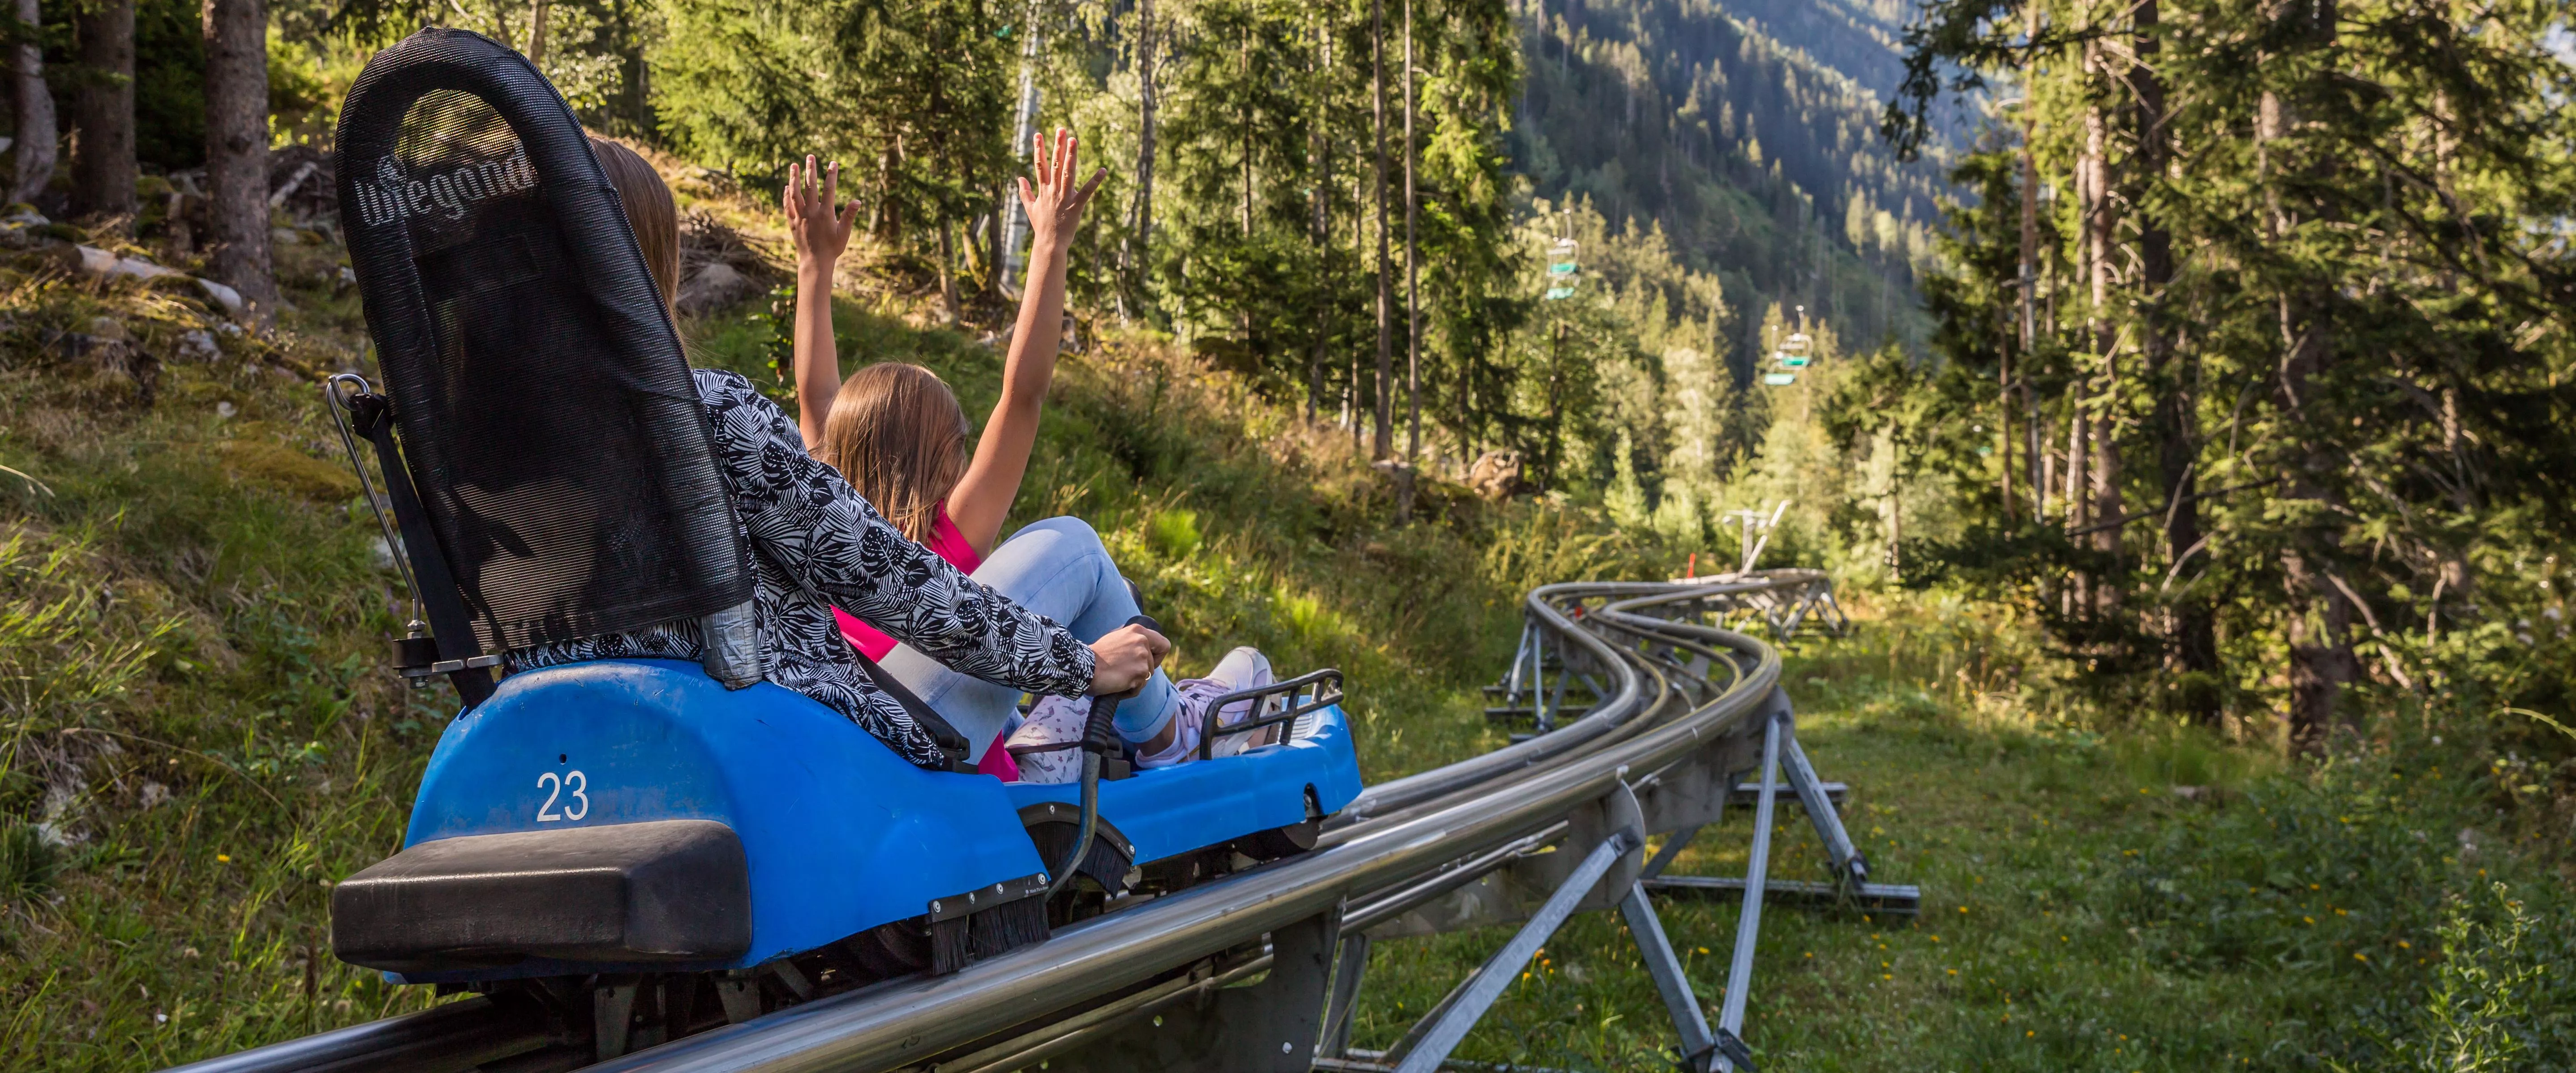 Chamonix Luge Alpine Coaster in France, Europe | Amusement Parks & Rides - Rated 3.5